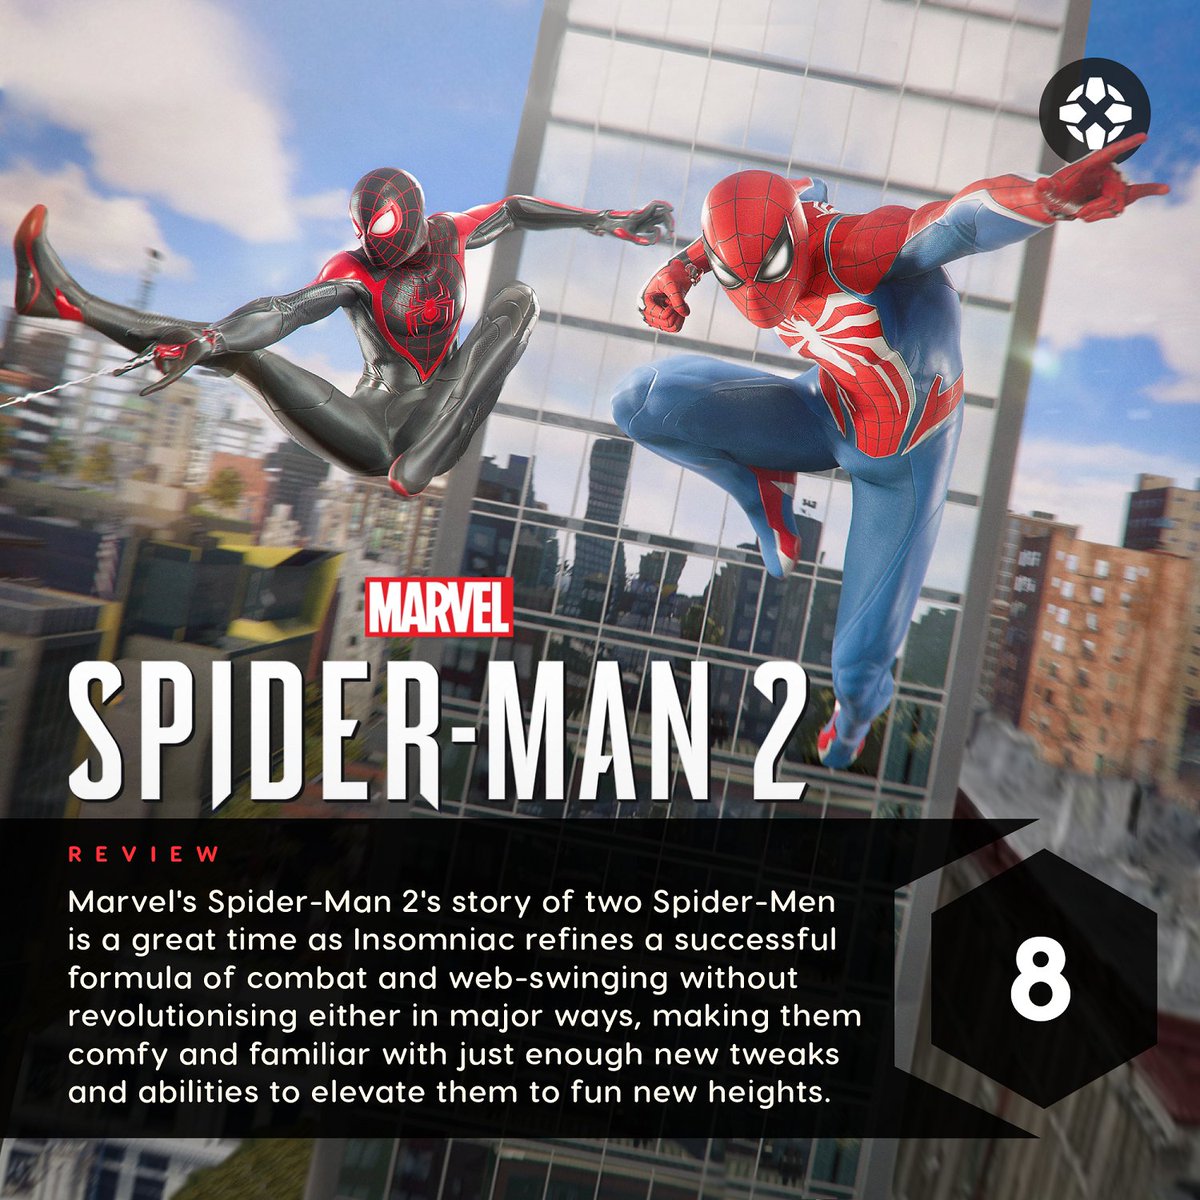 It’s safe to call Marvel's Spider-Man 2 another thrilling Spider-Man adventure that delivers Insomniac's best tale yet, and despite its open world falling short, it's a reliably fun superhero power trip. bit.ly/46OO21T